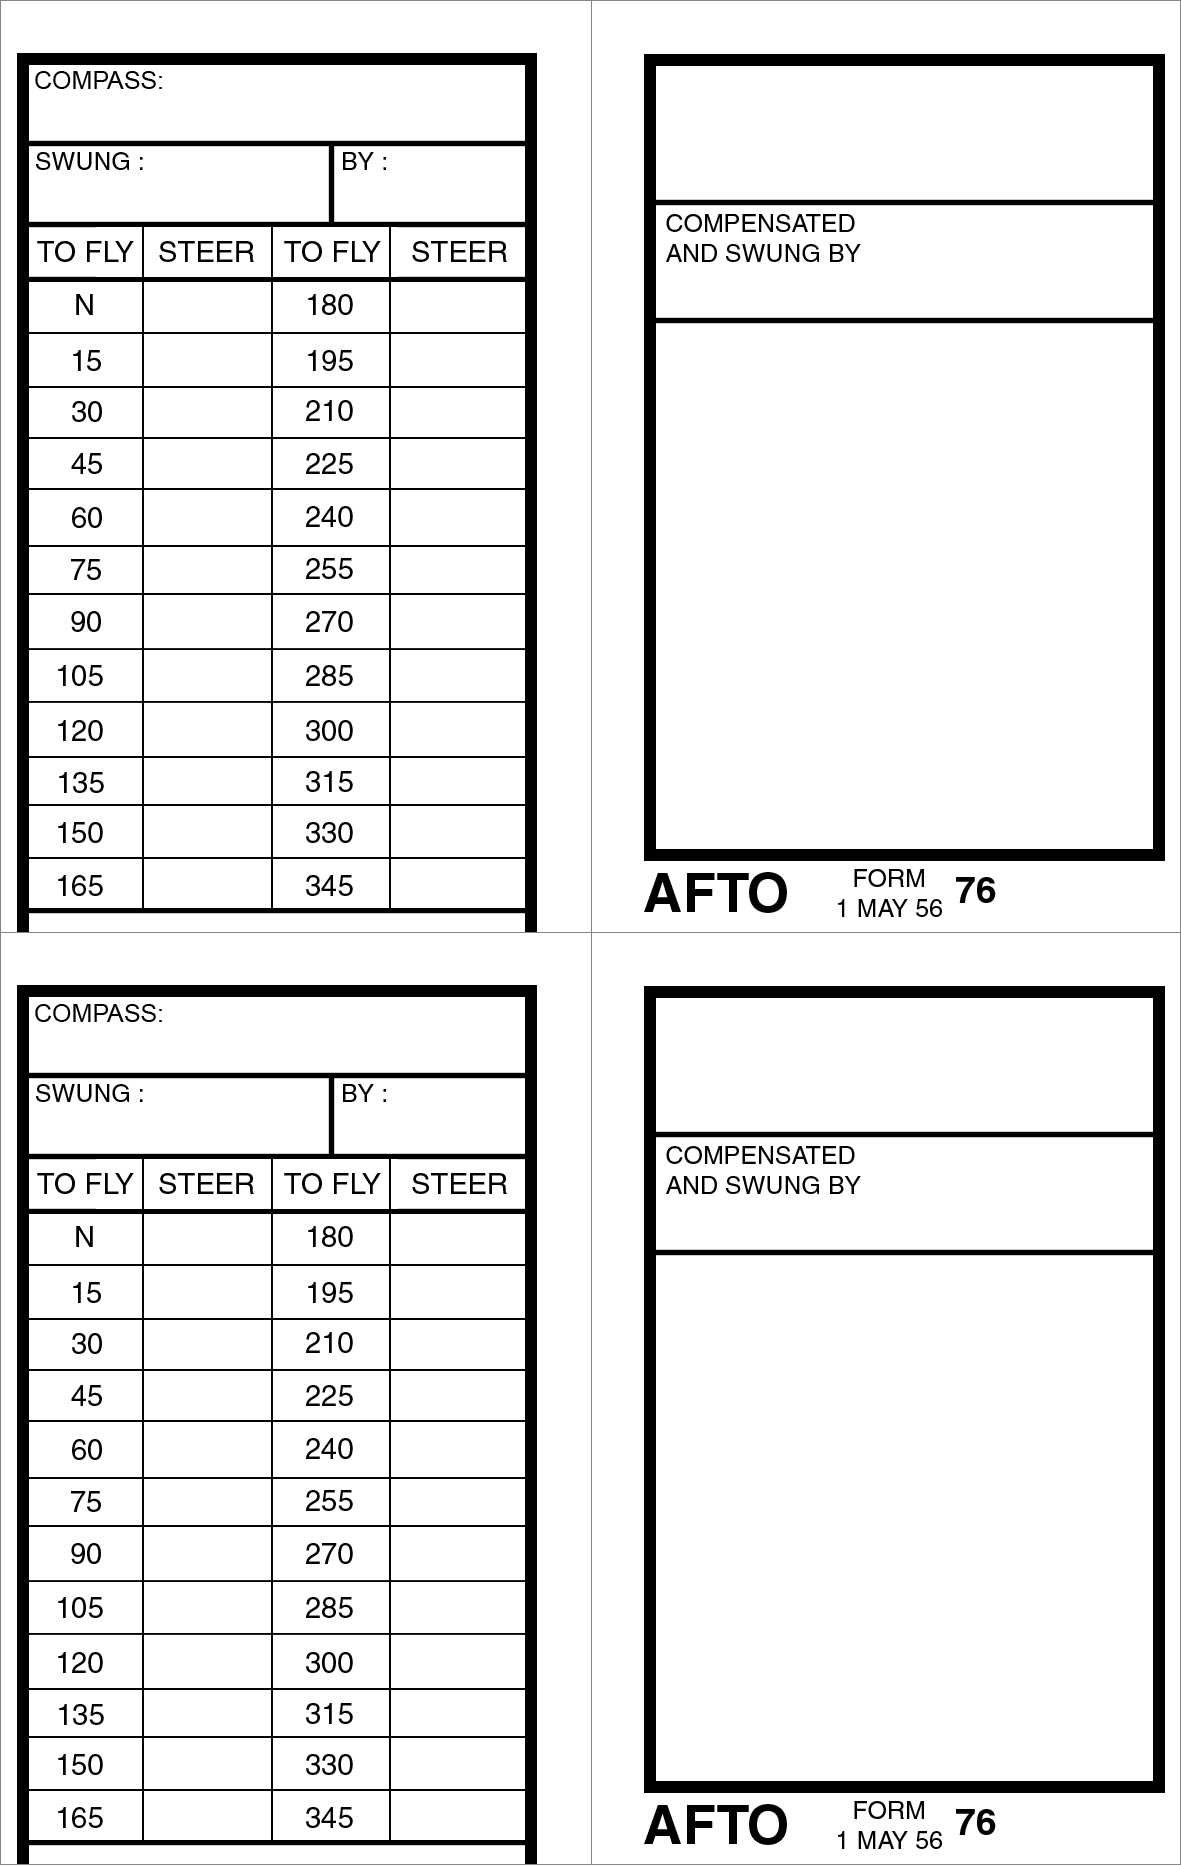 Compass Deviation Card Template ] – Can Be Found At Quot With Compass Deviation Card Template